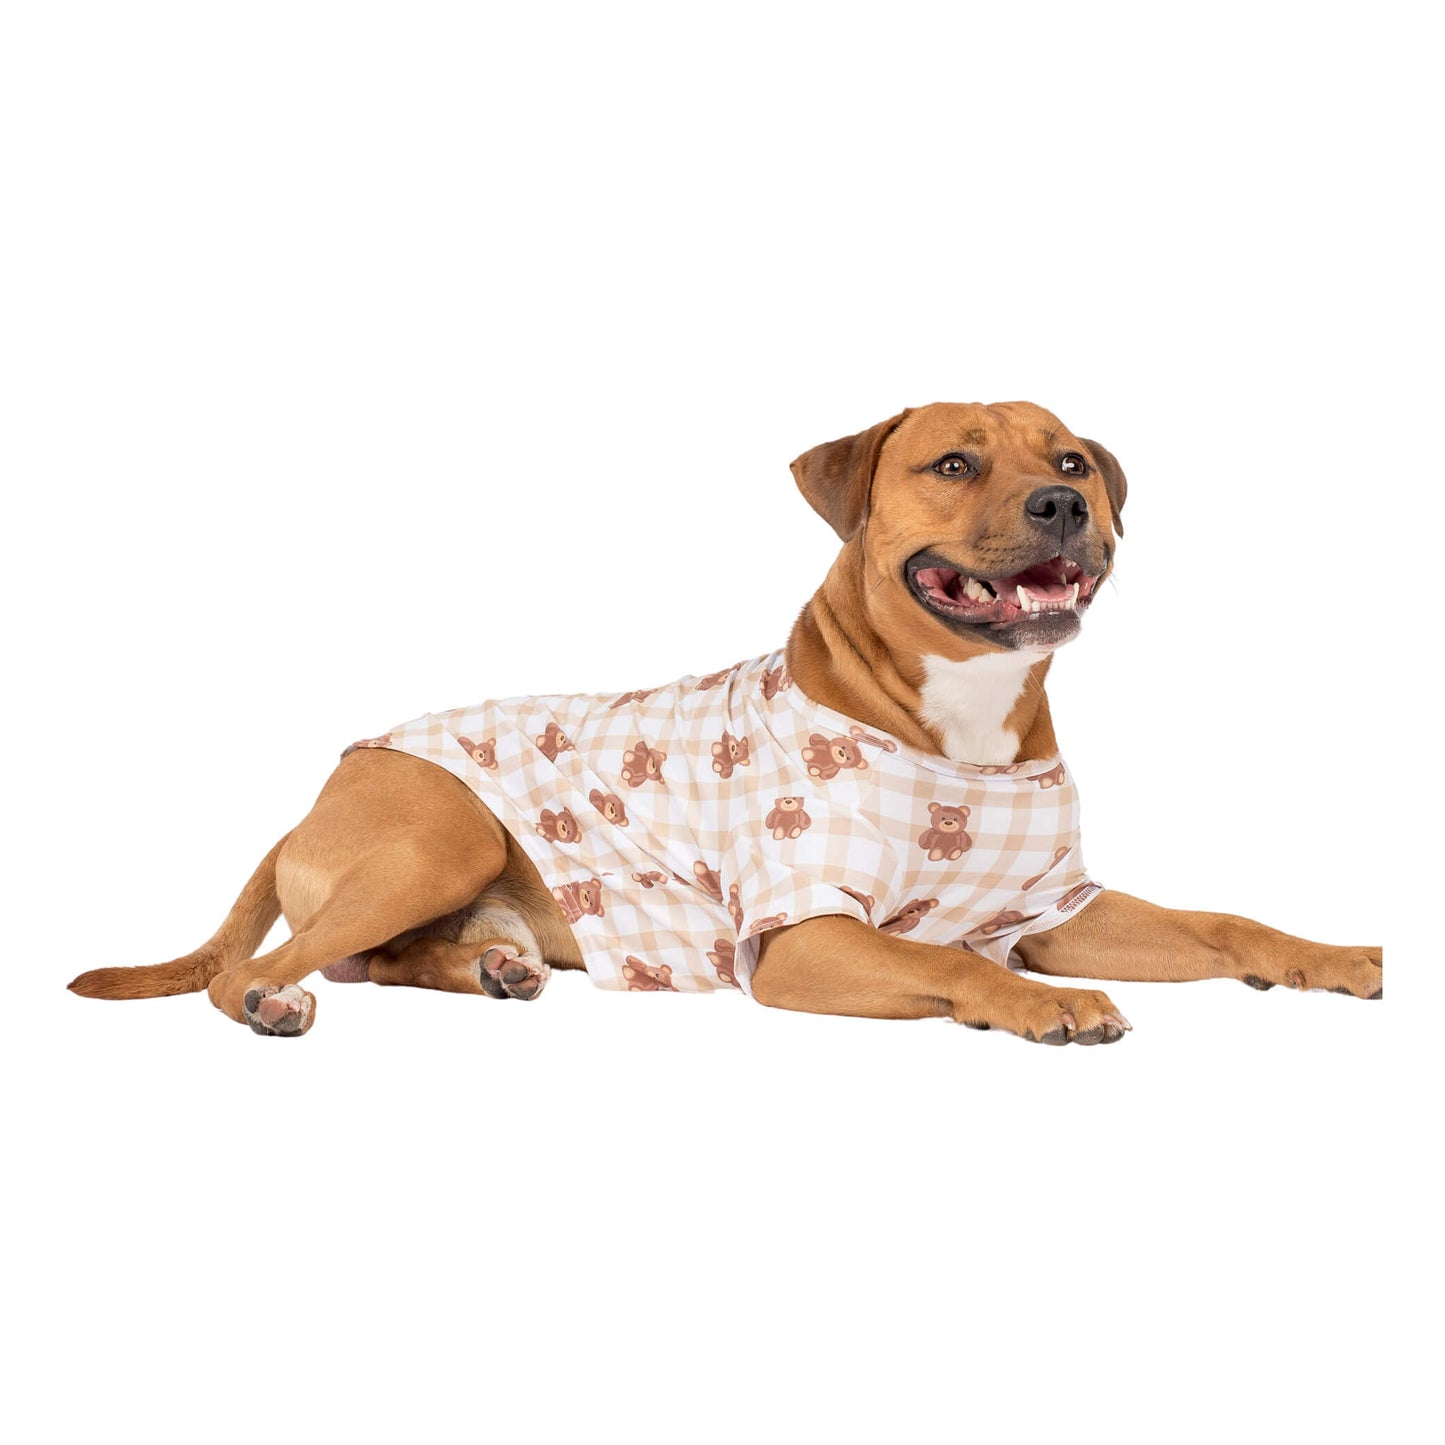 A Staffy wearing Vibrant Hounds Teddy Bear clothing for dogs. It is a Brown GIngham print with Teddy Bears printed on it.